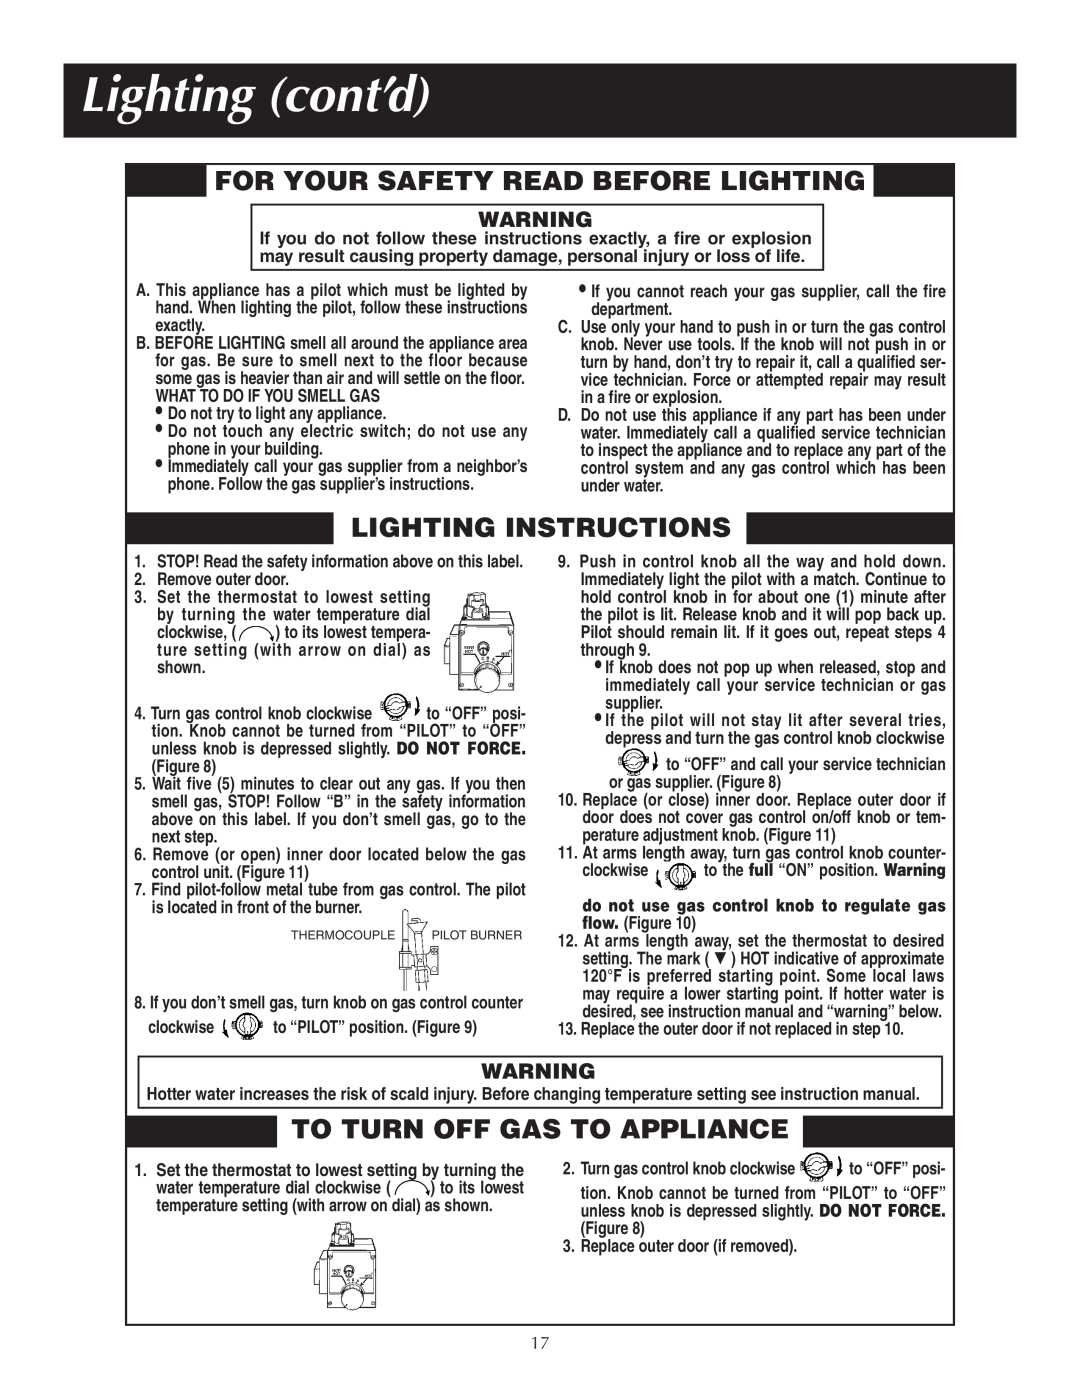 Reliance Water Heaters 184123-000 Lighting cont’d, For Your Safety Read Before Lighting, Lighting Instructions 